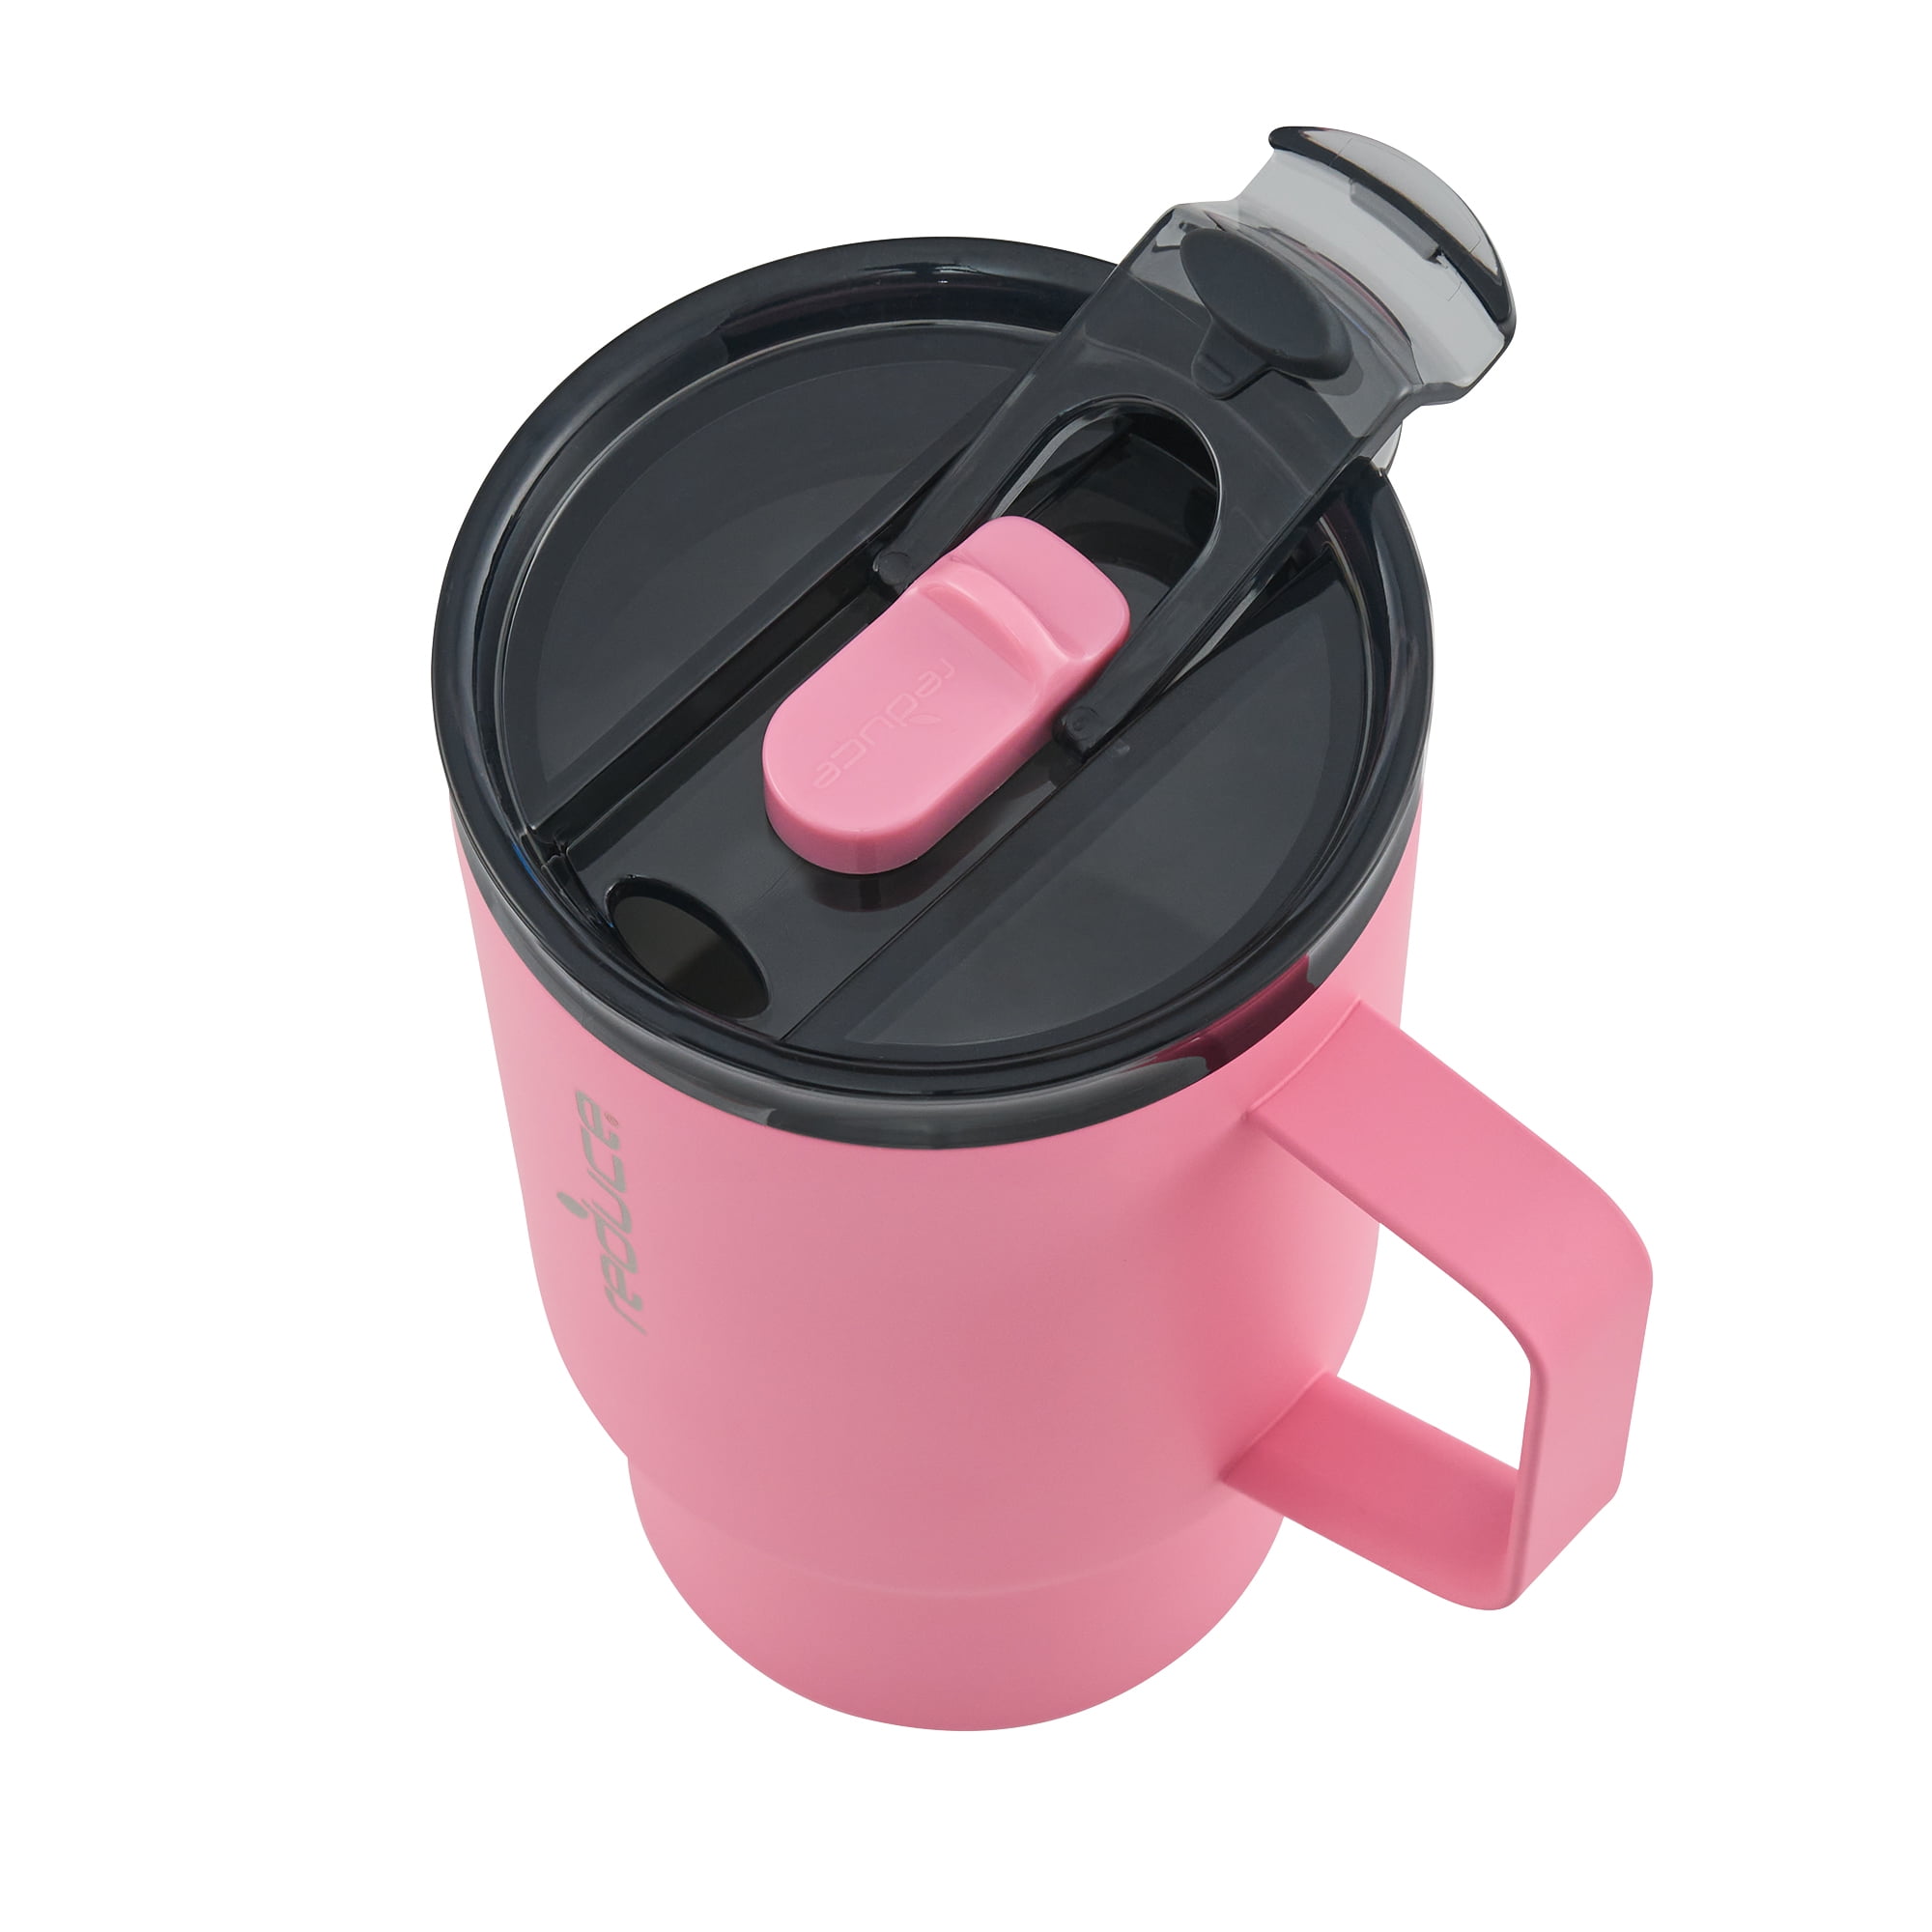 Vaso Térmico Insulated Travel Mug Thermos Cup Ideal for Coffee & Tea  Dishwasher and Microwave Safe - Keeps Drinks Hot or Cold, 500 ml / 16.9 fl  oz cap